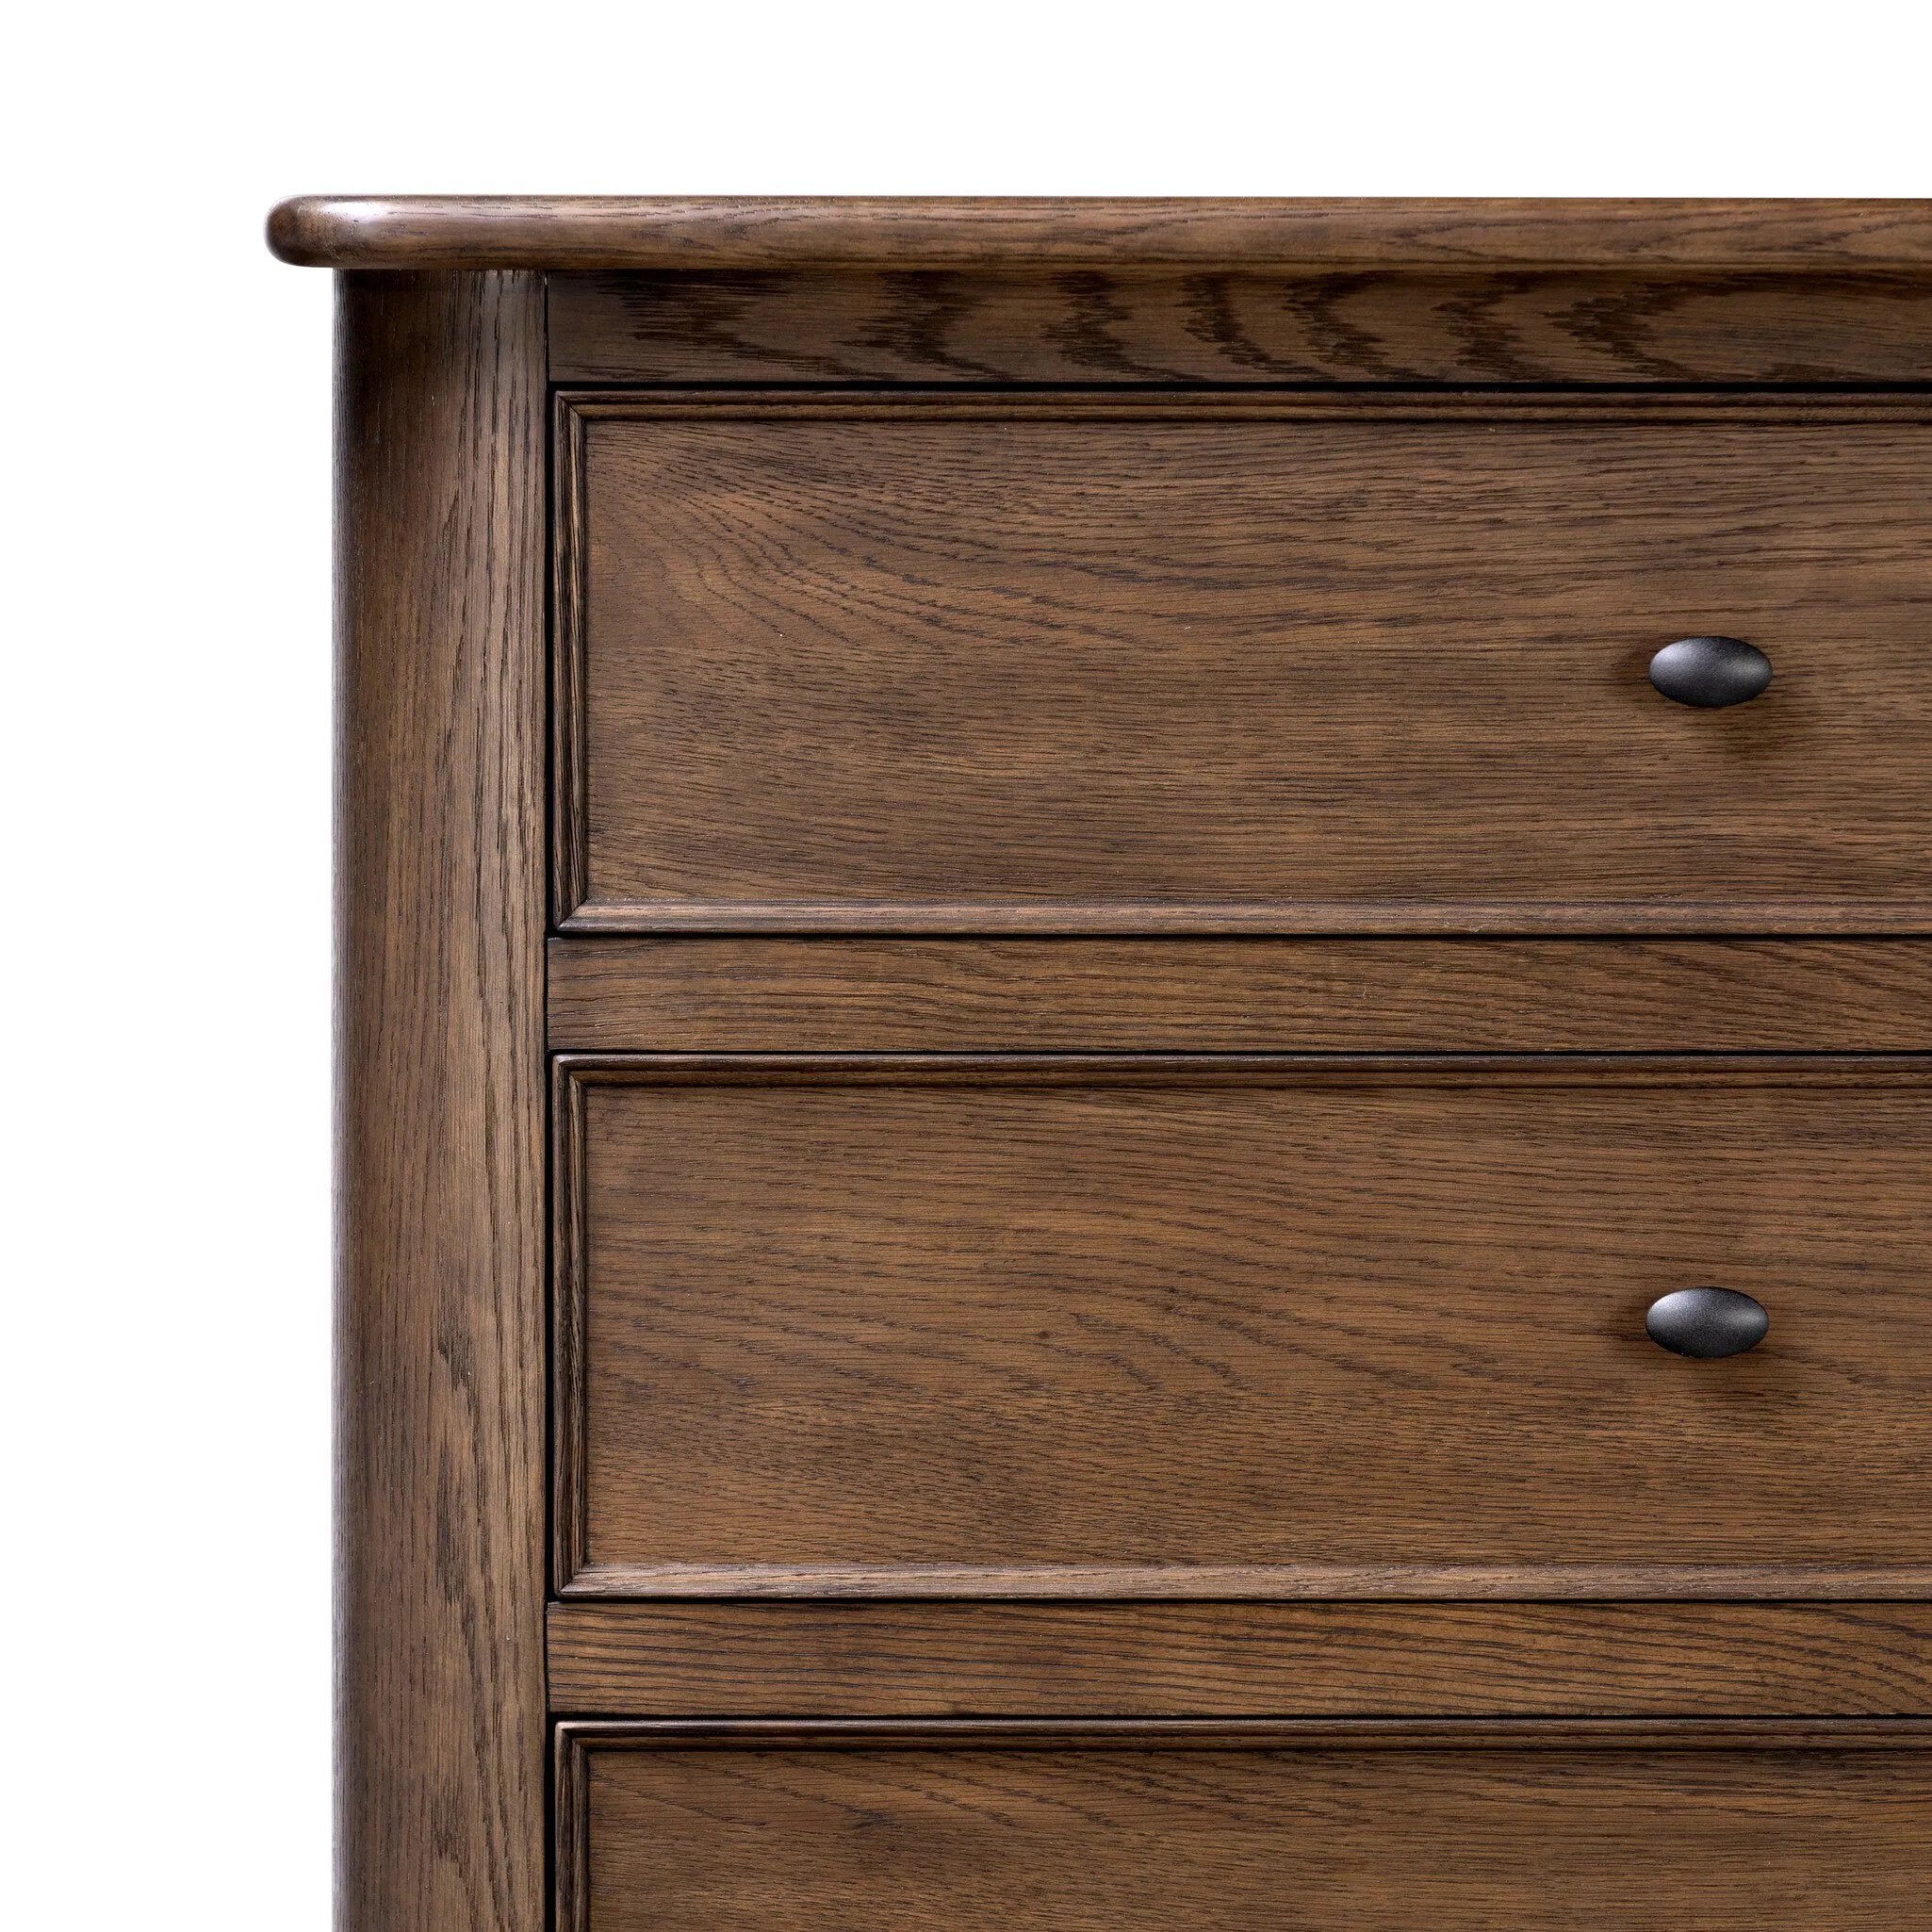 Like an heirloom tallboy with six drawers, this aged oak dresser has room for it all. Detailed with an overhang surface, carved edges top to bottom, angled legs and oval drawer pulls finished in dark gunmetal.Collection: Bolto Amethyst Home provides interior design, new home construction design consulting, vintage area rugs, and lighting in the Houston metro area.